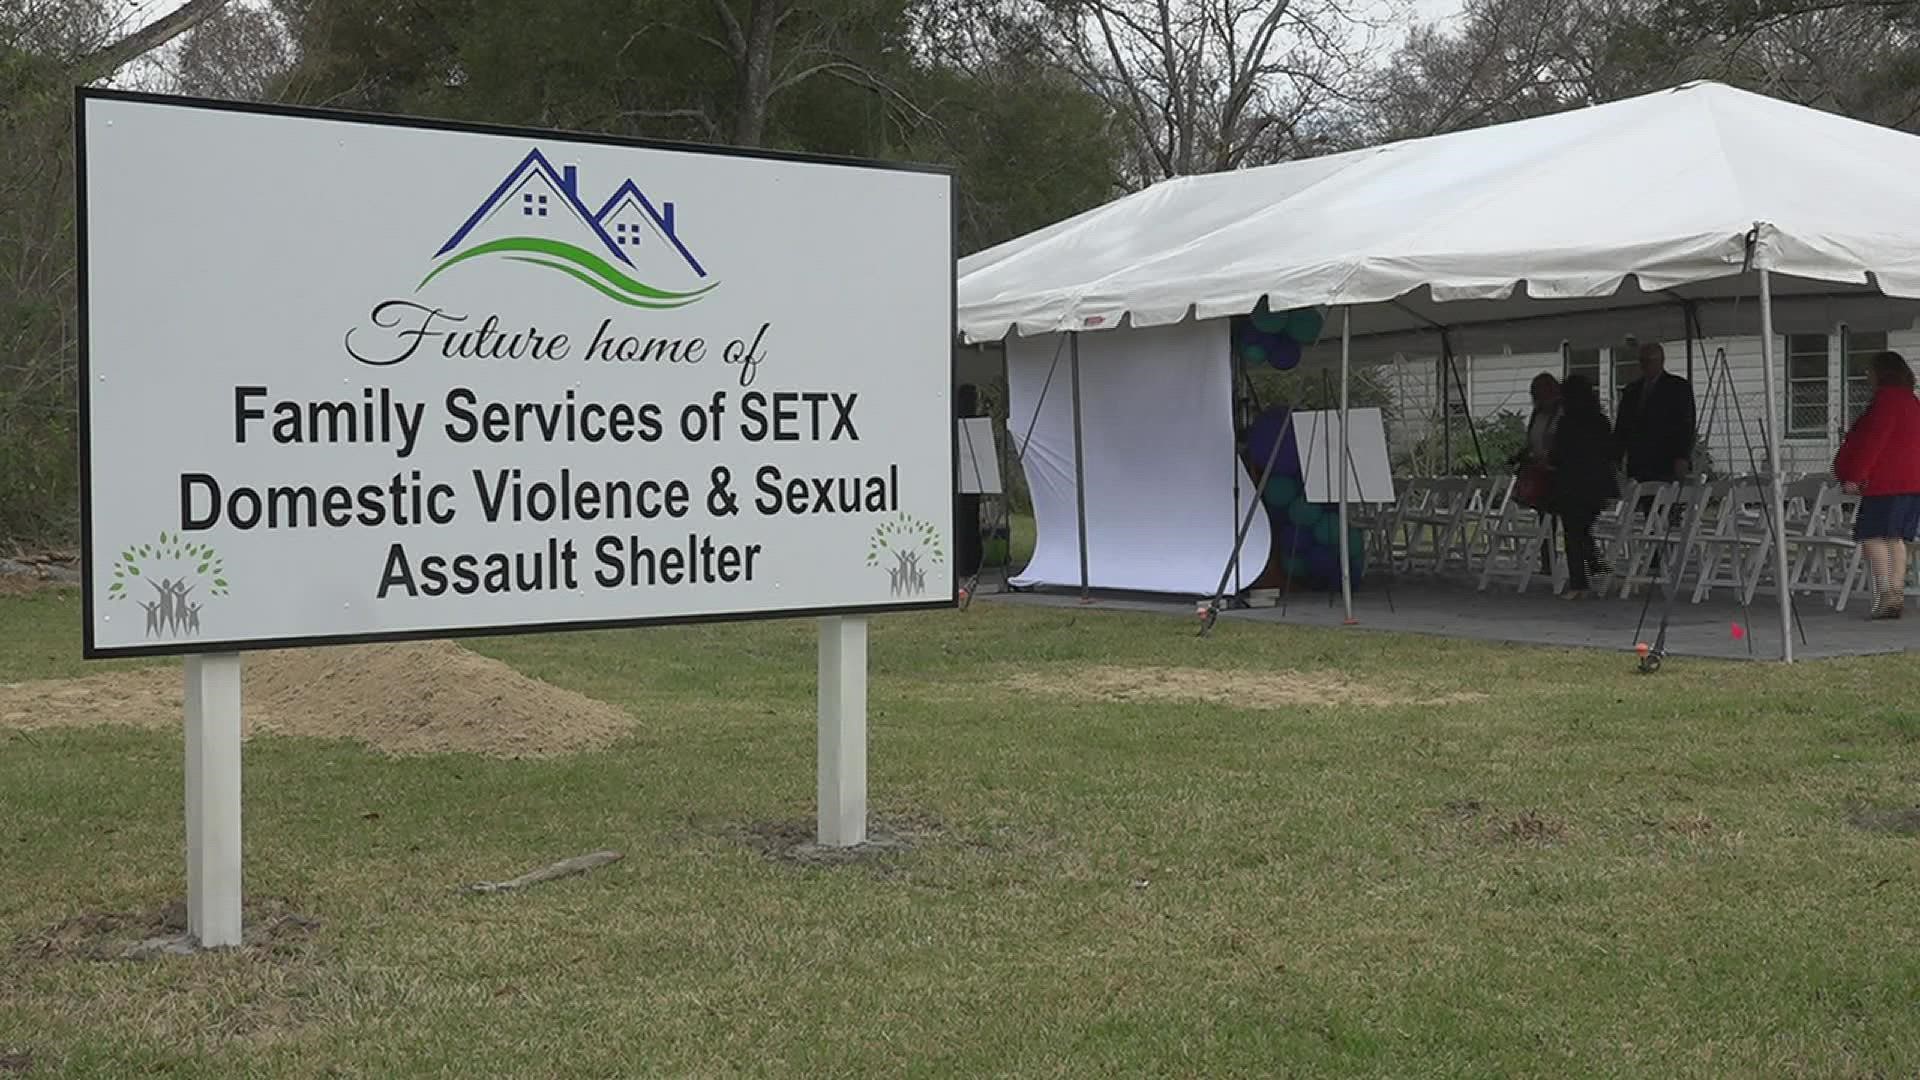 The organization broke ground on a new shelter that is going to offer a safe place for victims of domestic violence and sexual assault.